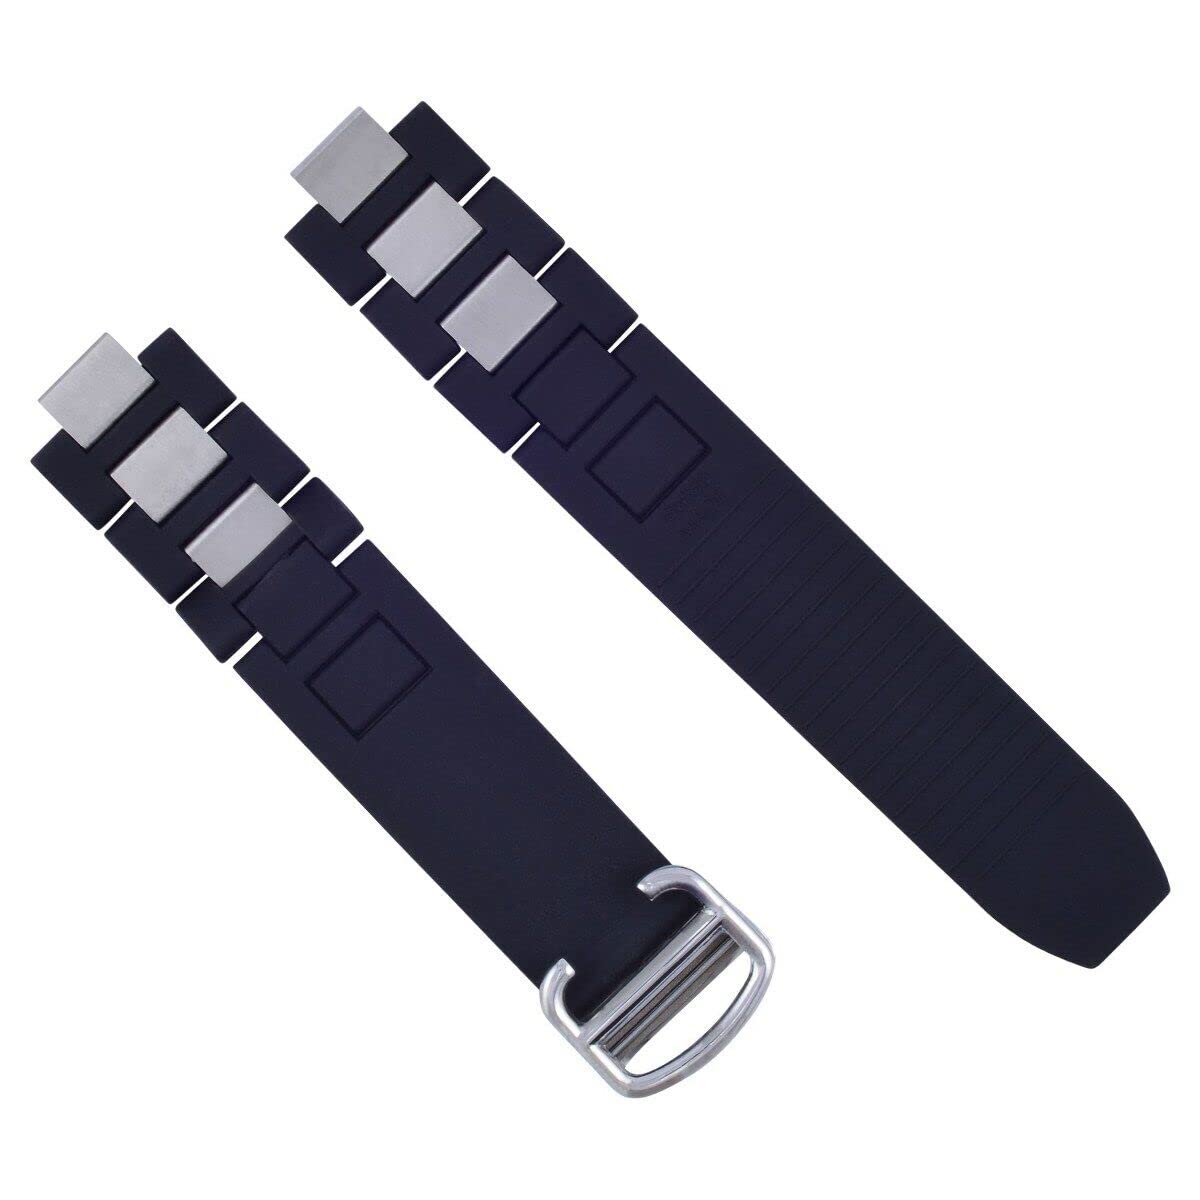 Ewatchparts RUBBER WATCH BAND STRAP COMPATIBLE WITH FIT CARTIER 20MM MUST 21 CHRONOSCAPH AUTOSCAPH CLASP